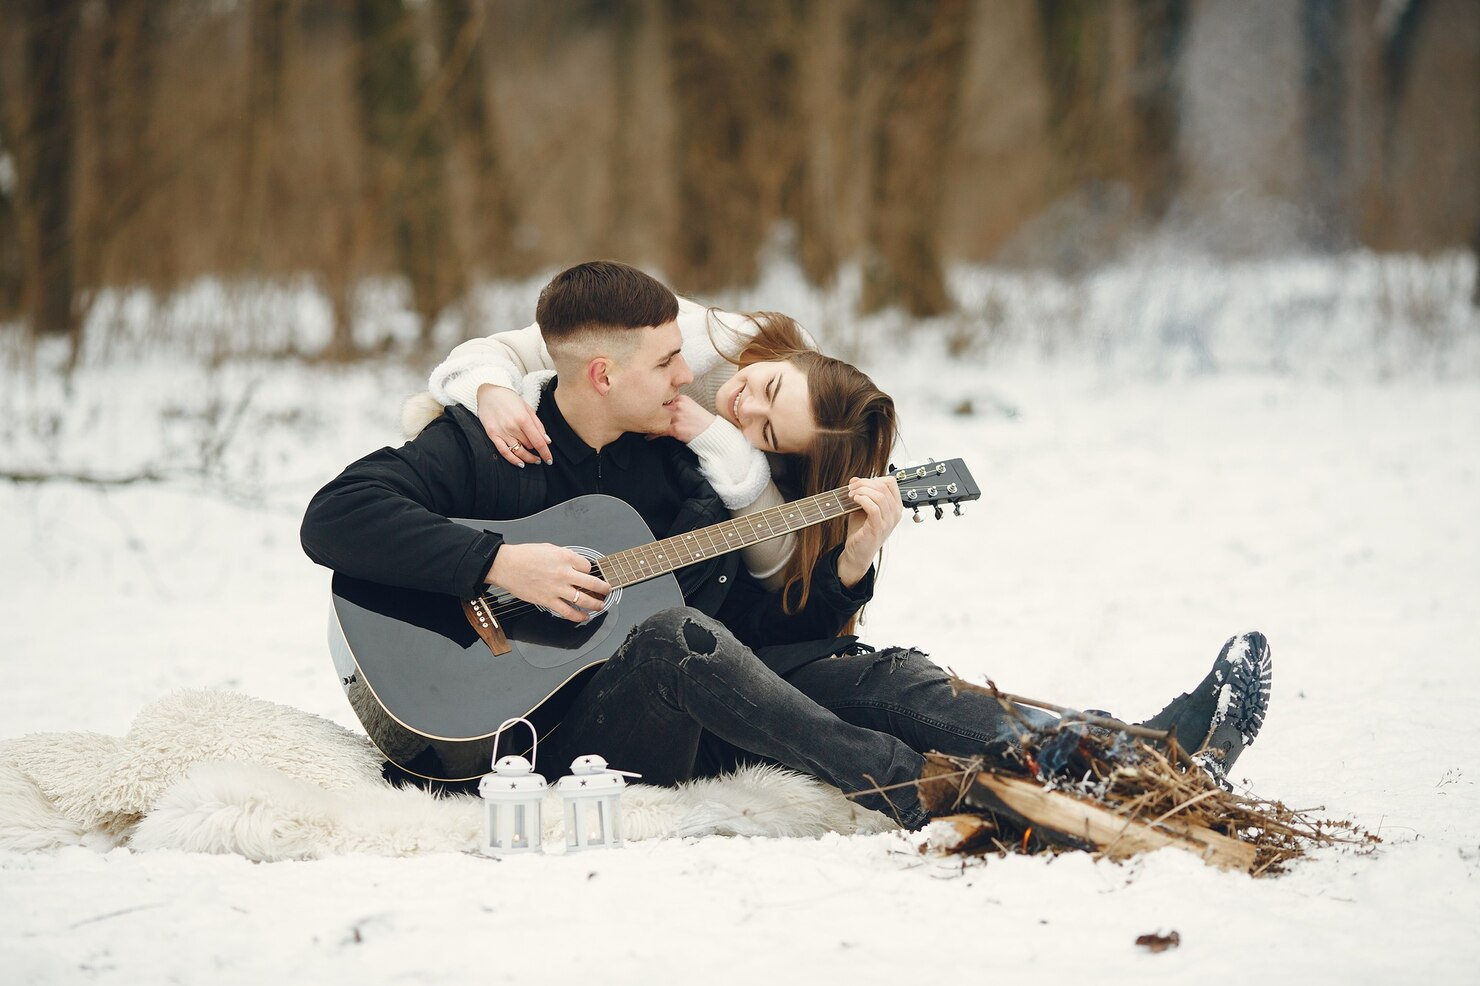 A couple enjoying the winter while the man strums a guitar.
